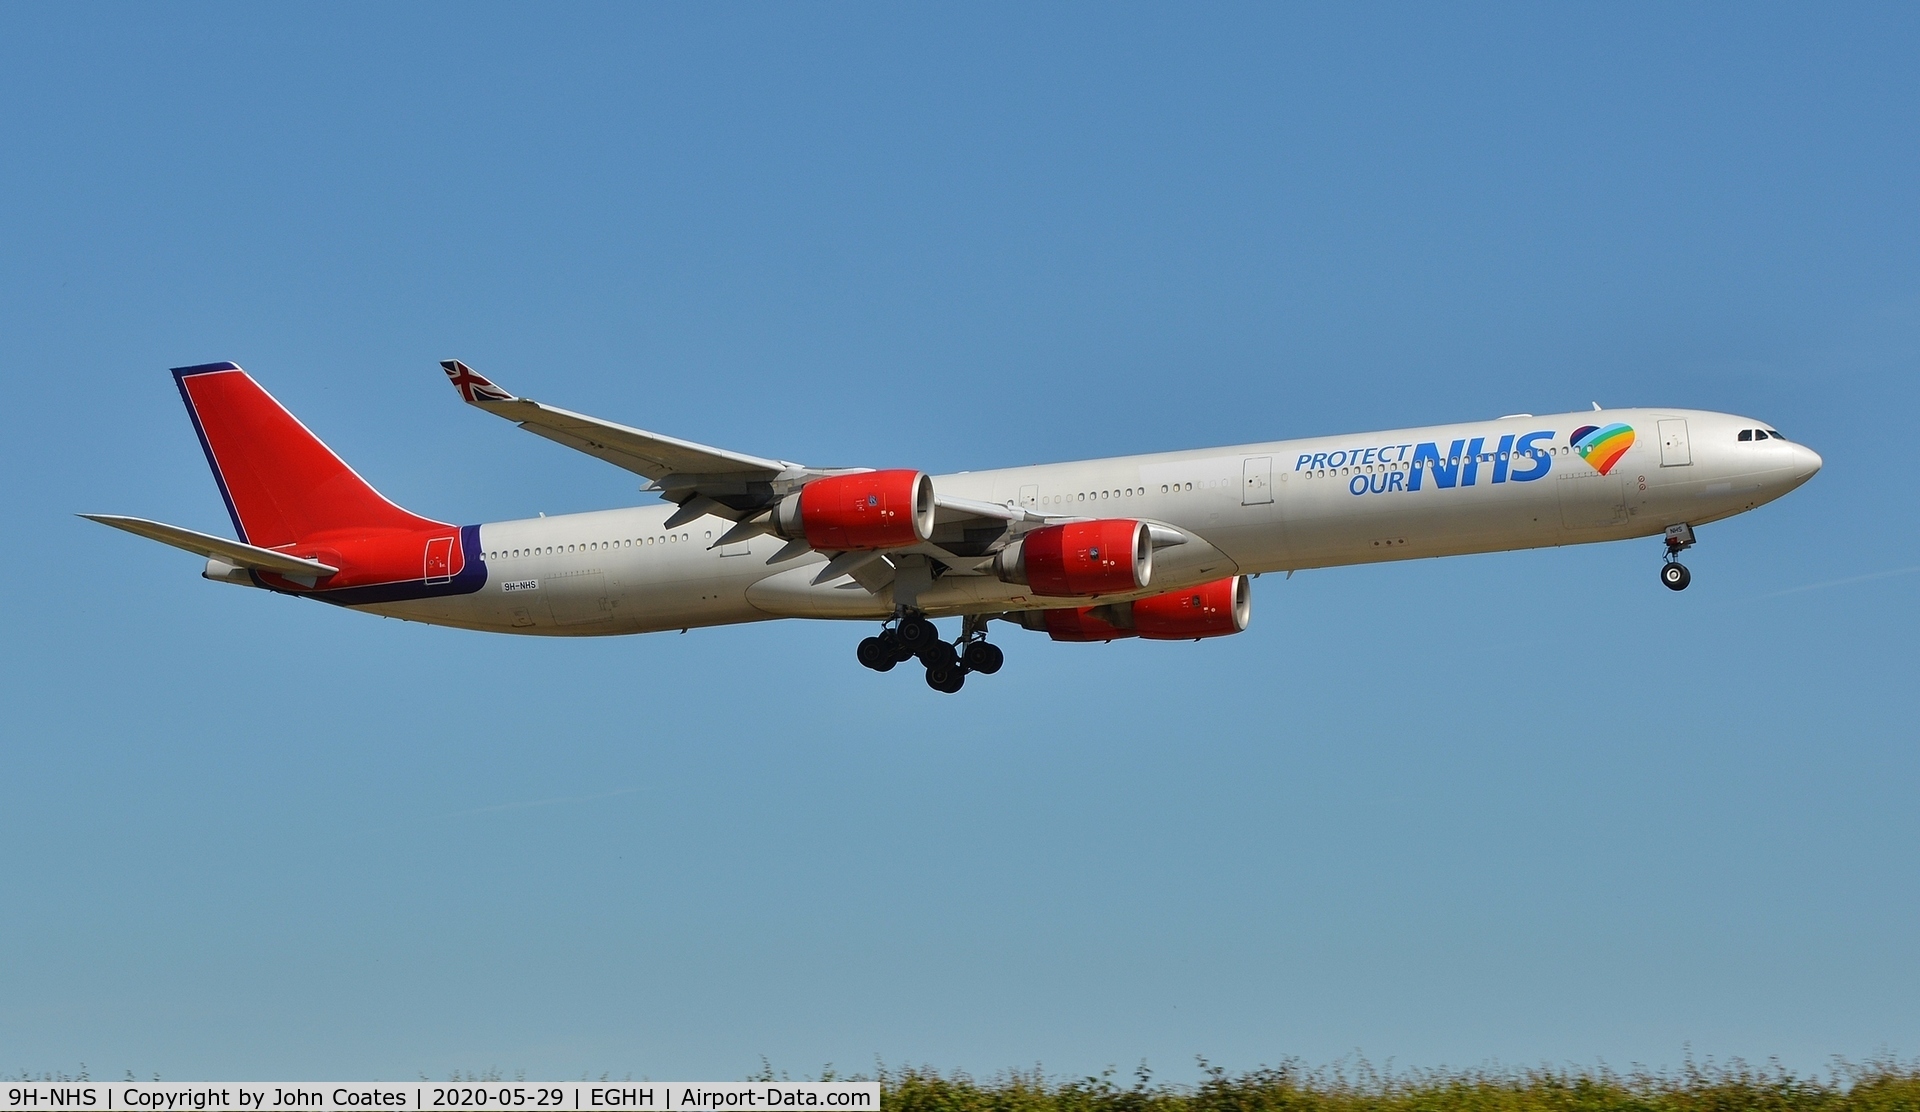 9H-NHS, 2006 Airbus A340-642 C/N 736, On approach to 08